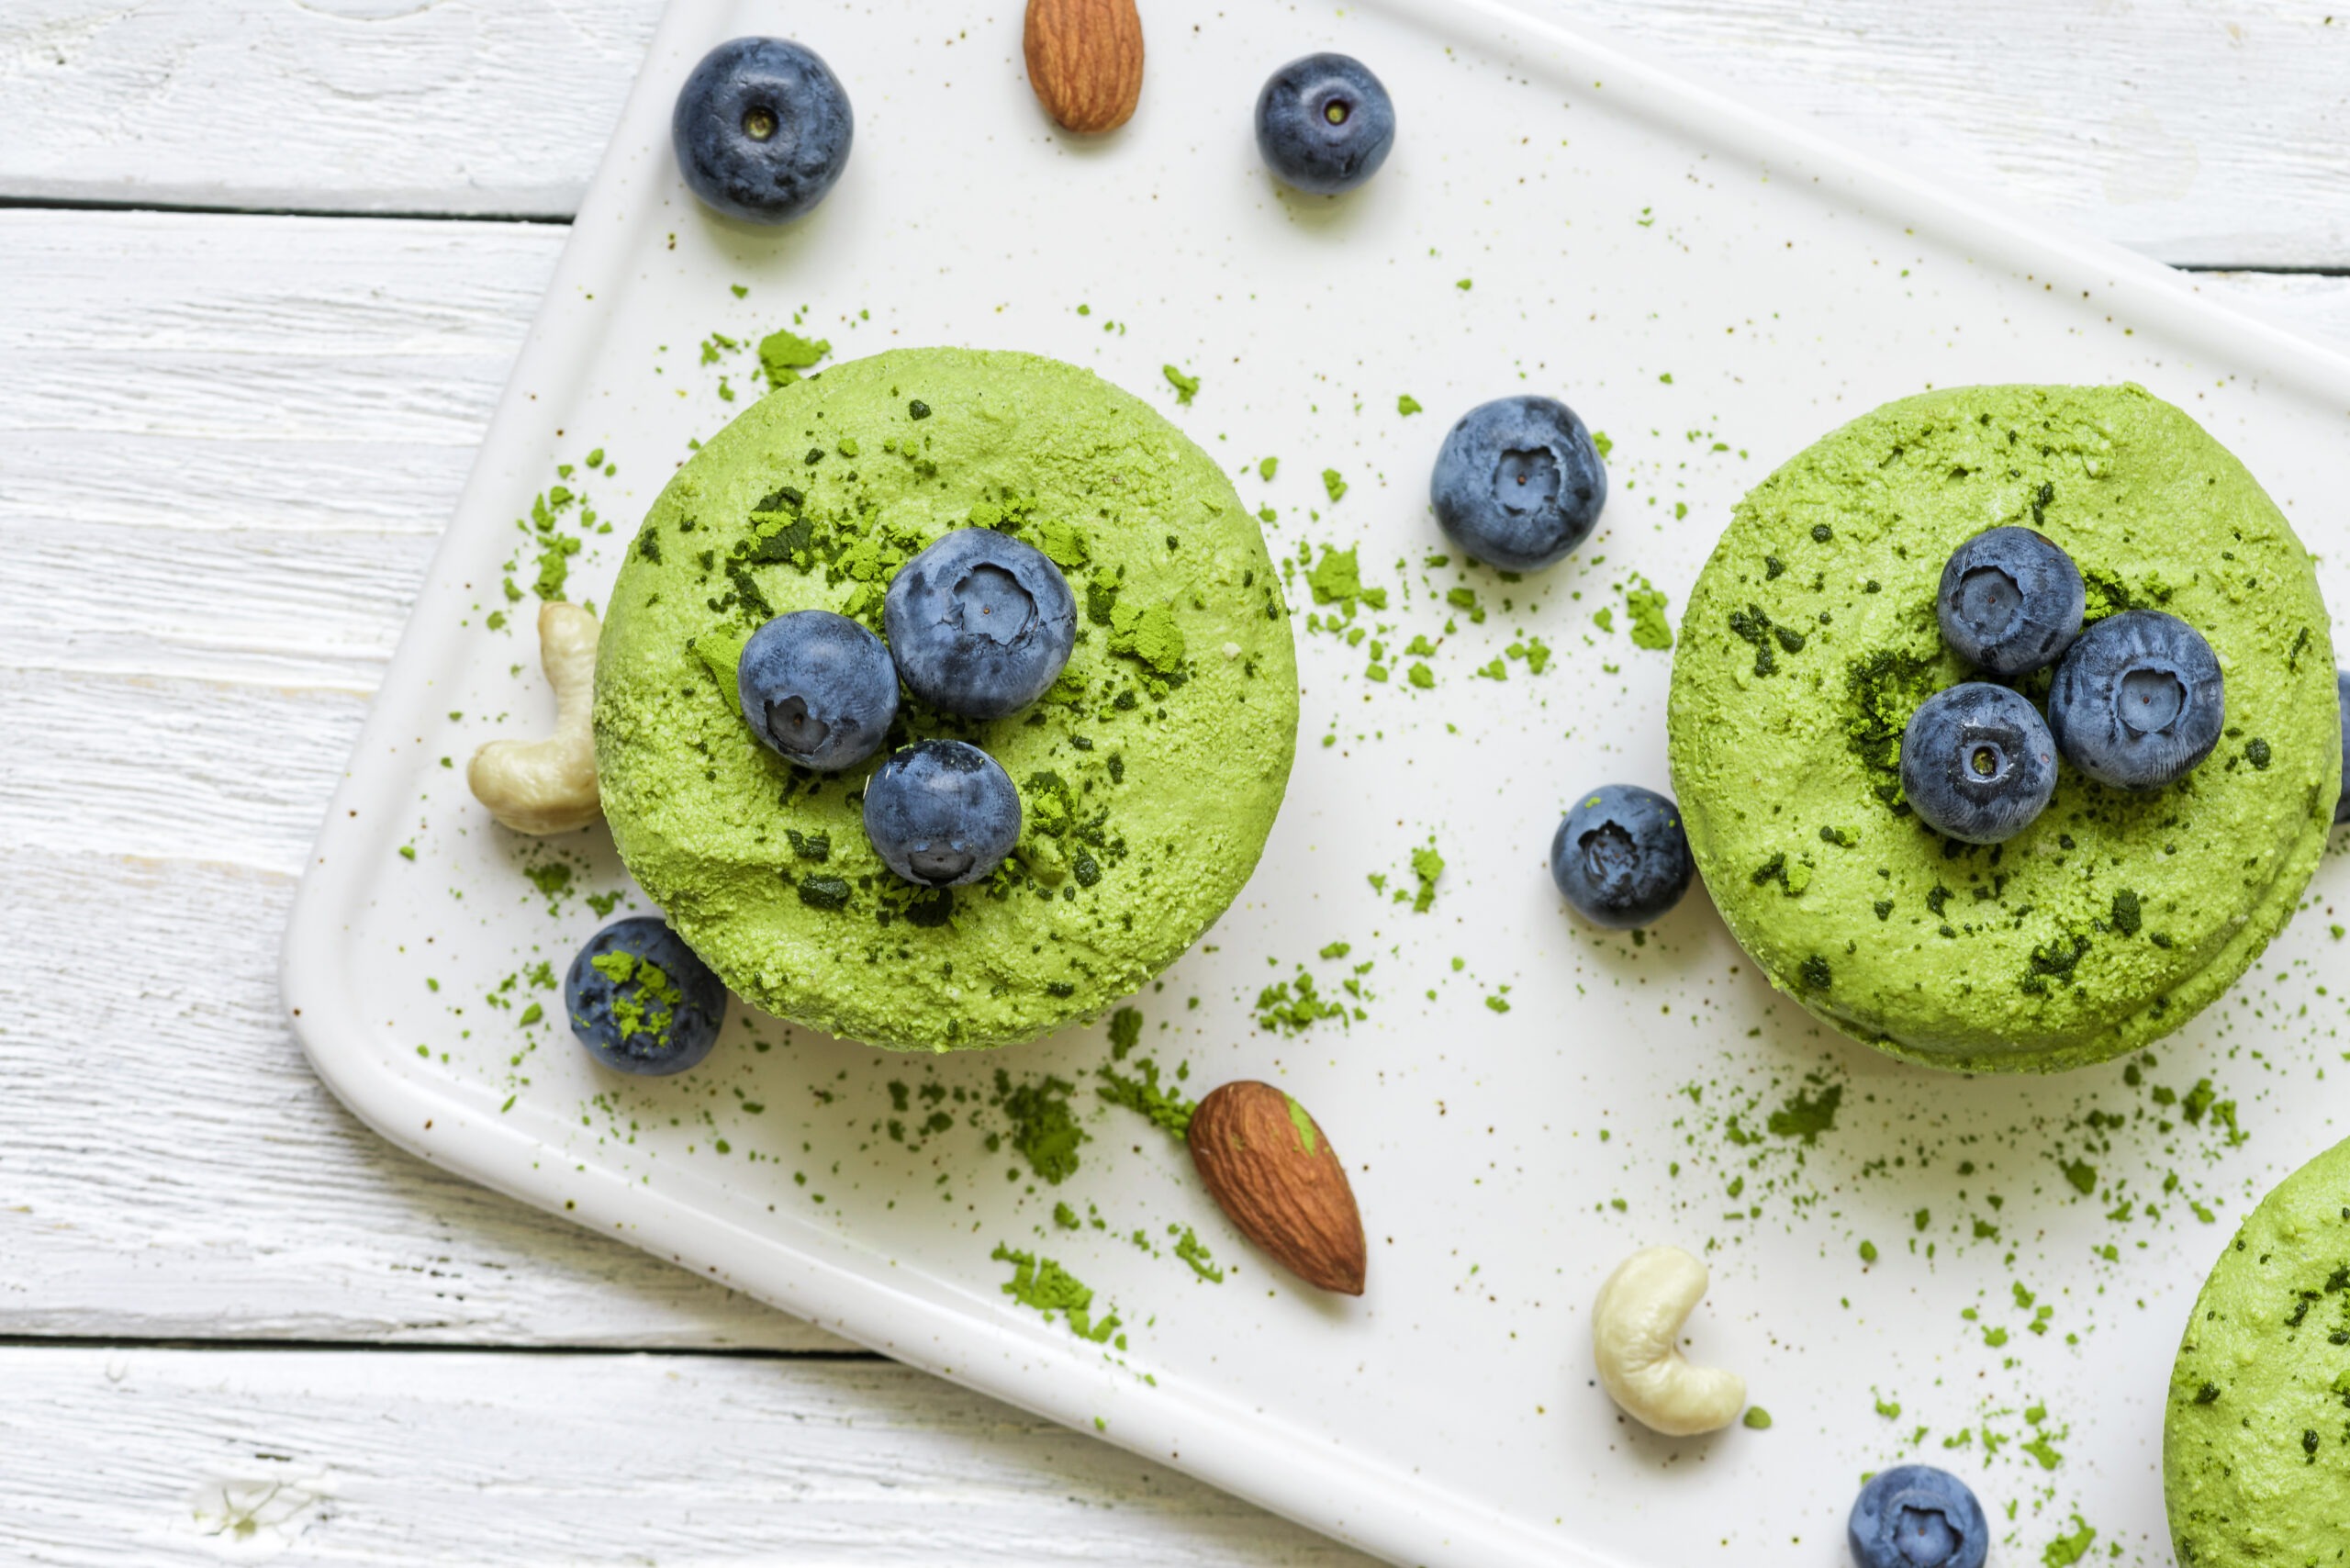 gluten free diet food-green matcha cakes with blueberries- a gluten free diet may help back pain